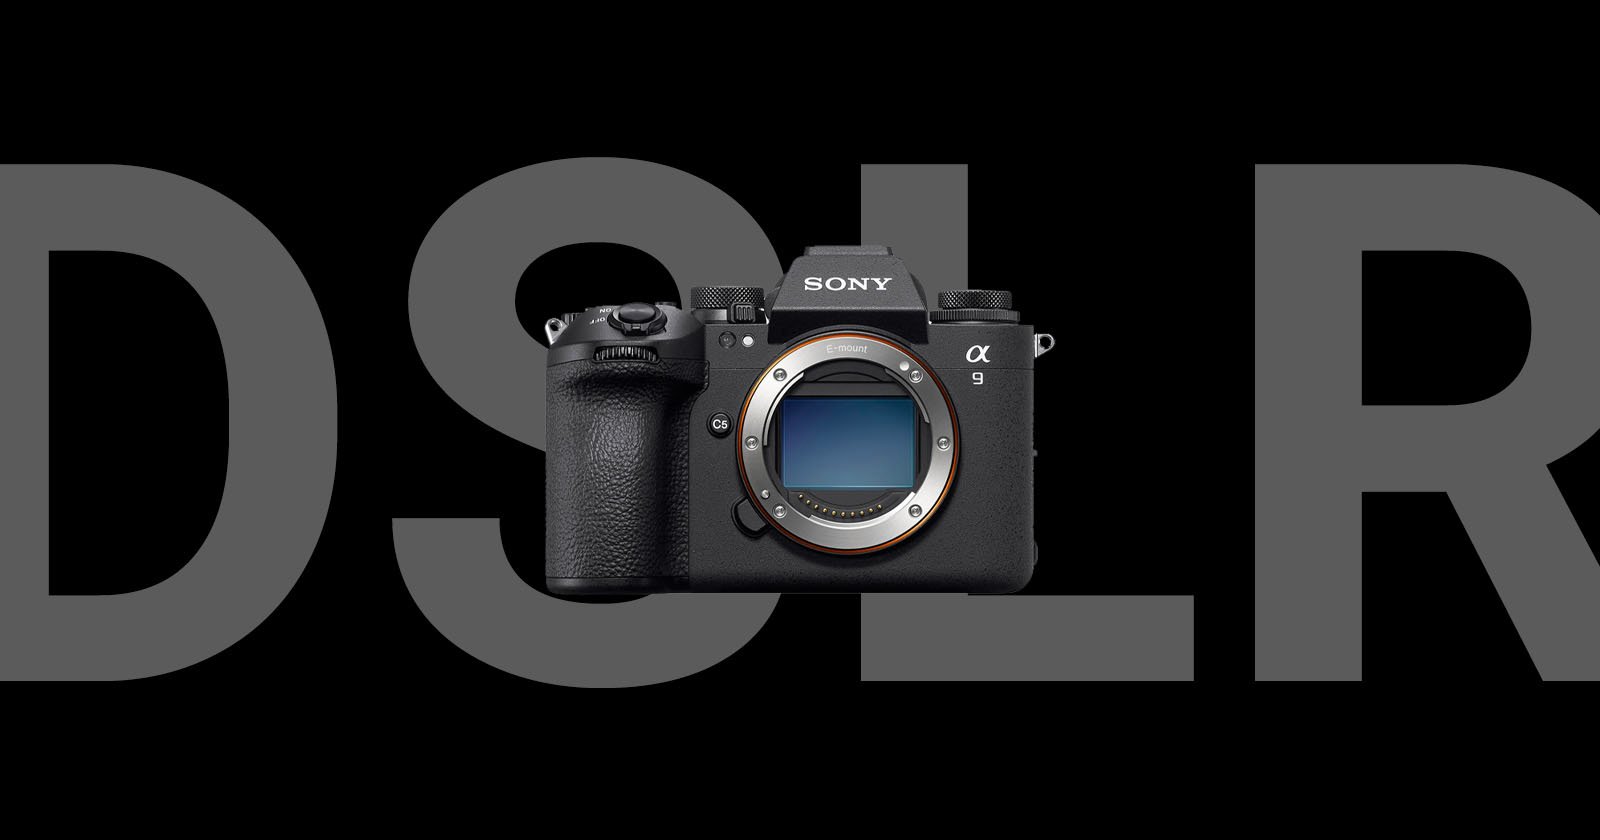 A sony alpha a9 mirrorless camera without a lens, displayed against a black background with the letters dslr in gray.